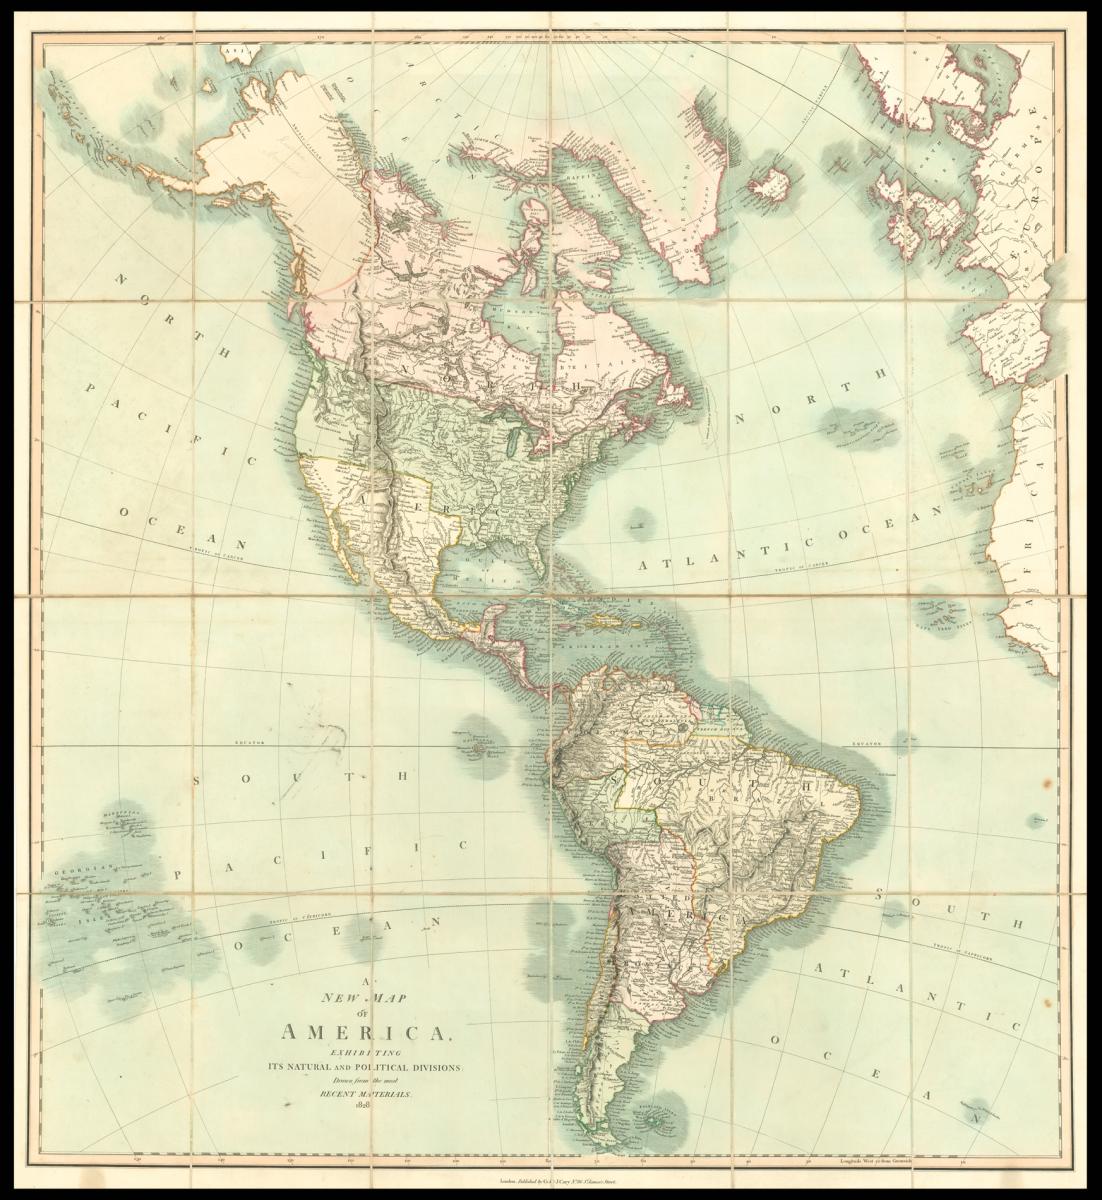 Cary's rare wall maps of the world and four continents